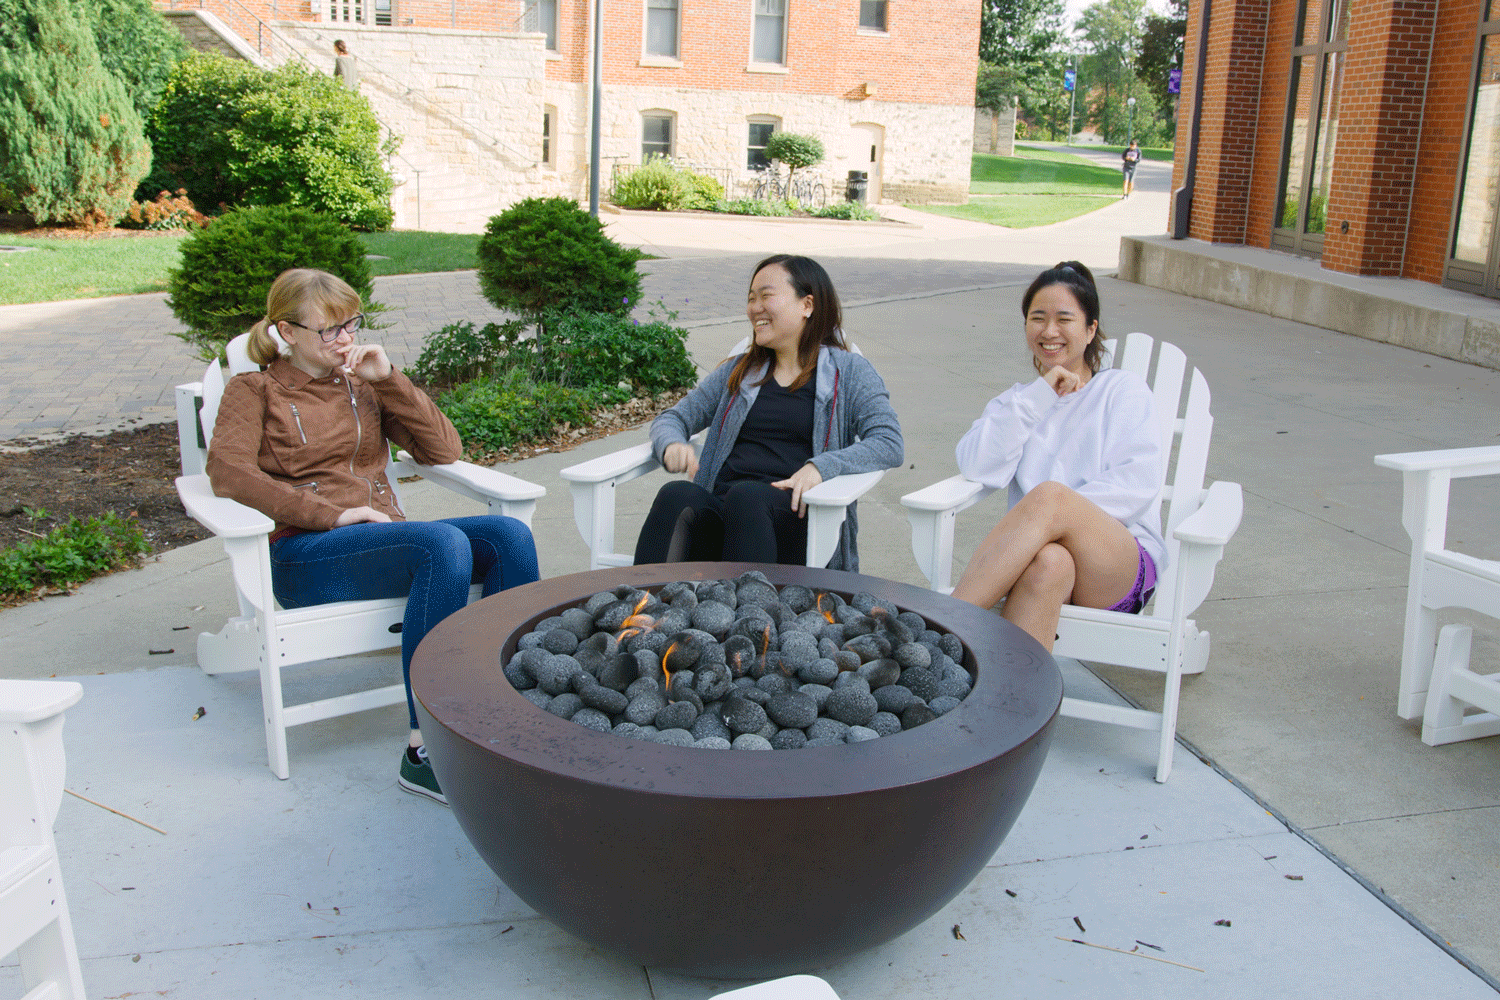 Cornell students take a break over the block break by the firepit on campus